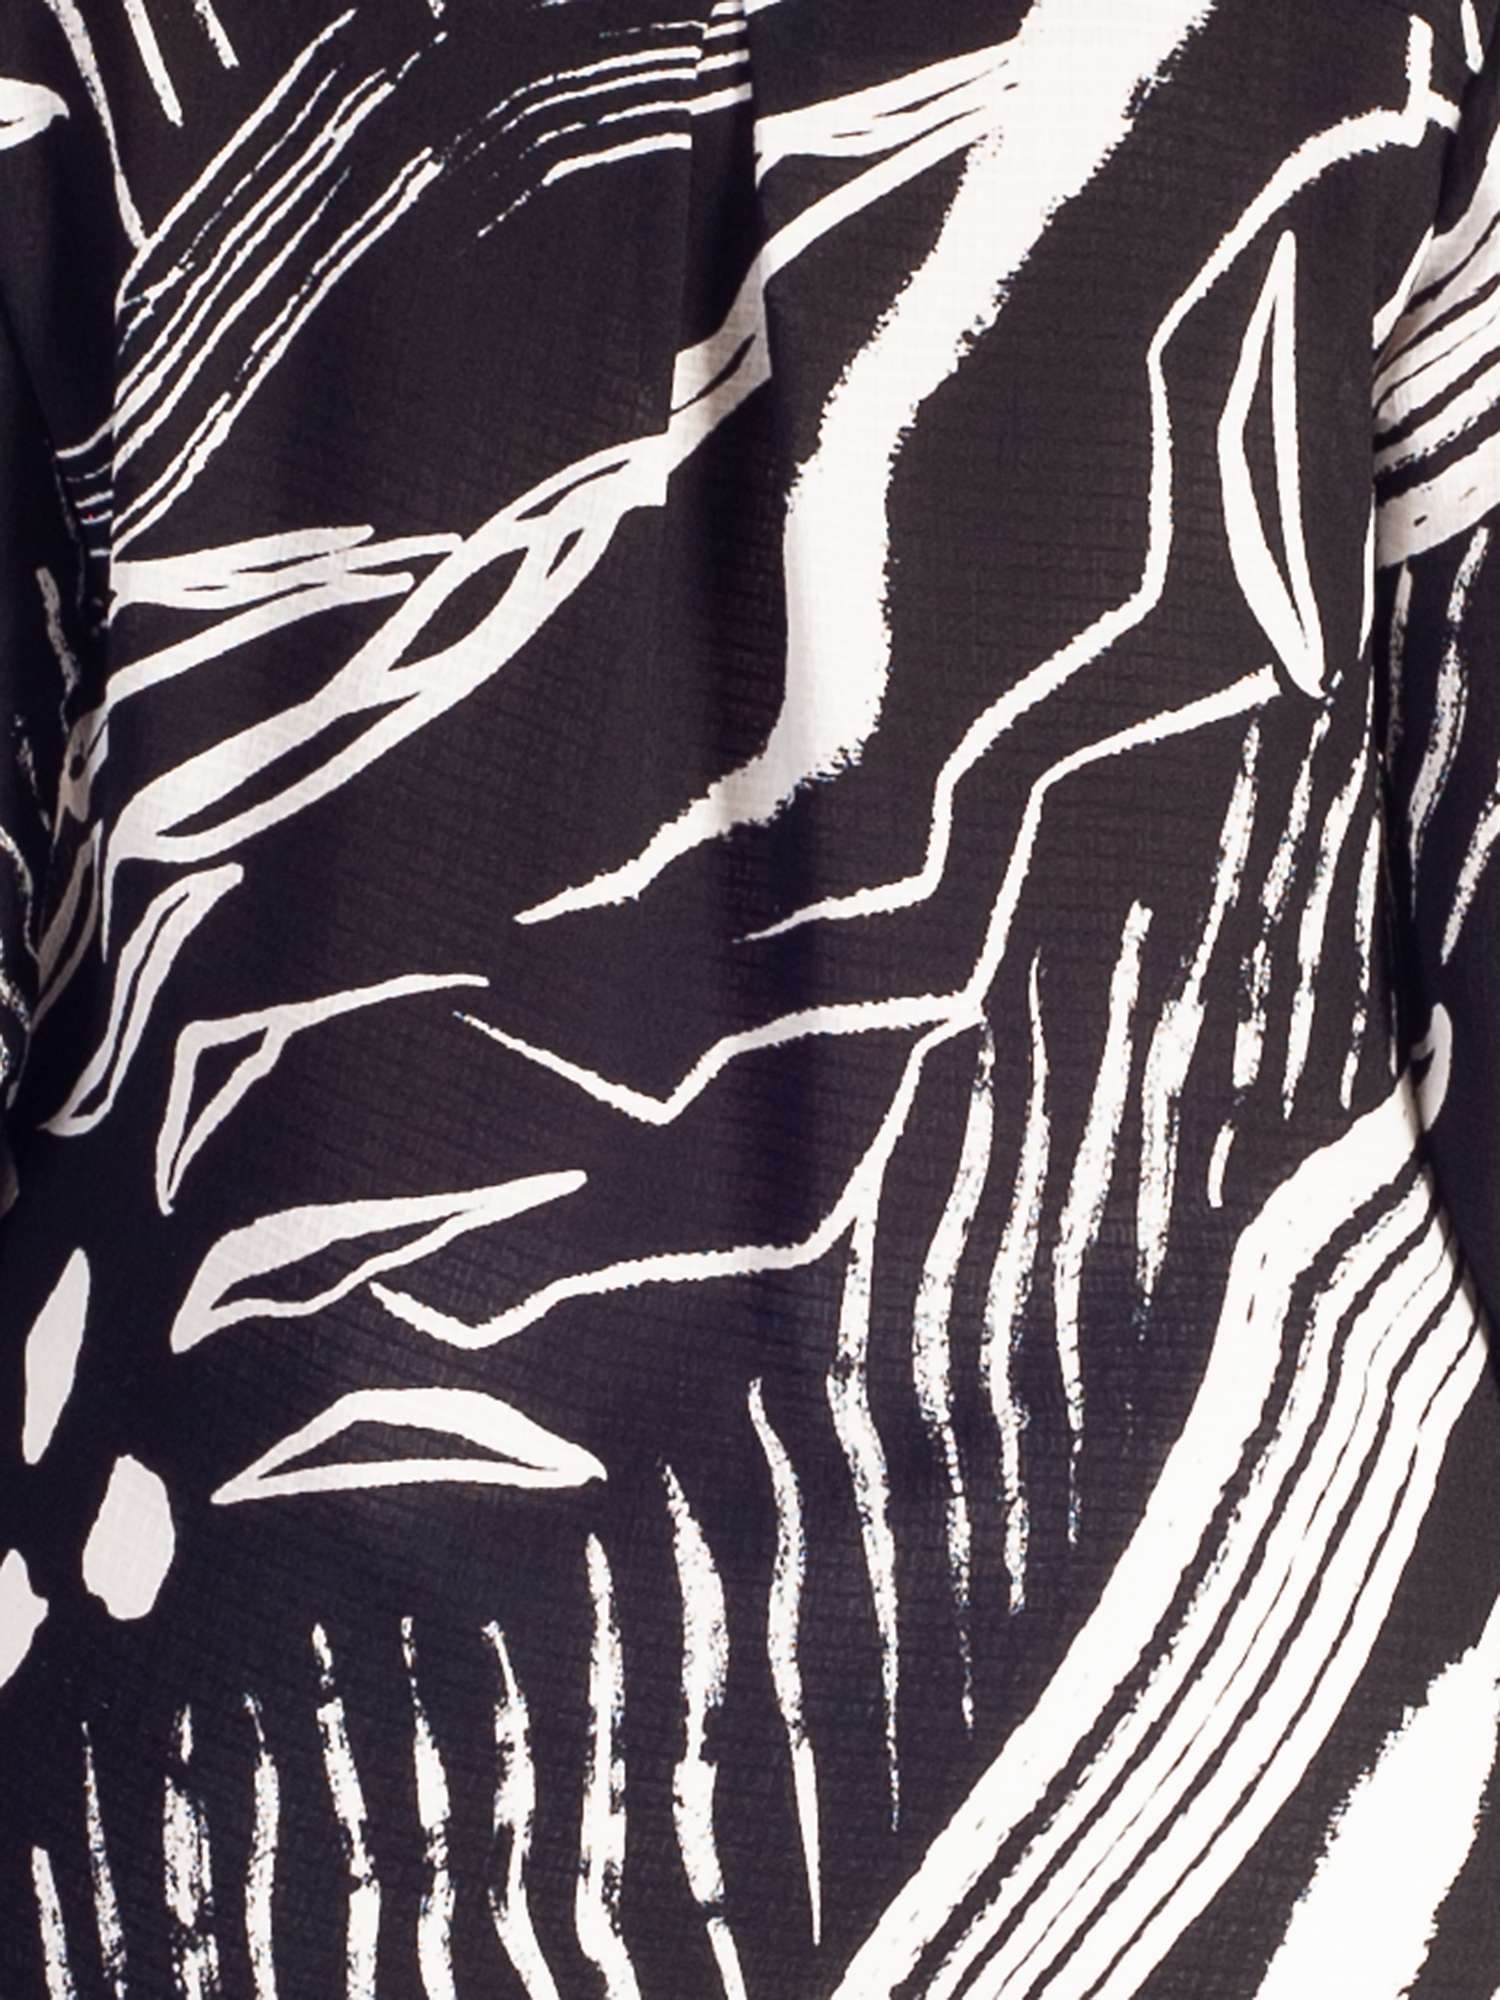 Buy chesca Button Front Abstract Print Blouse, Black/White Online at johnlewis.com